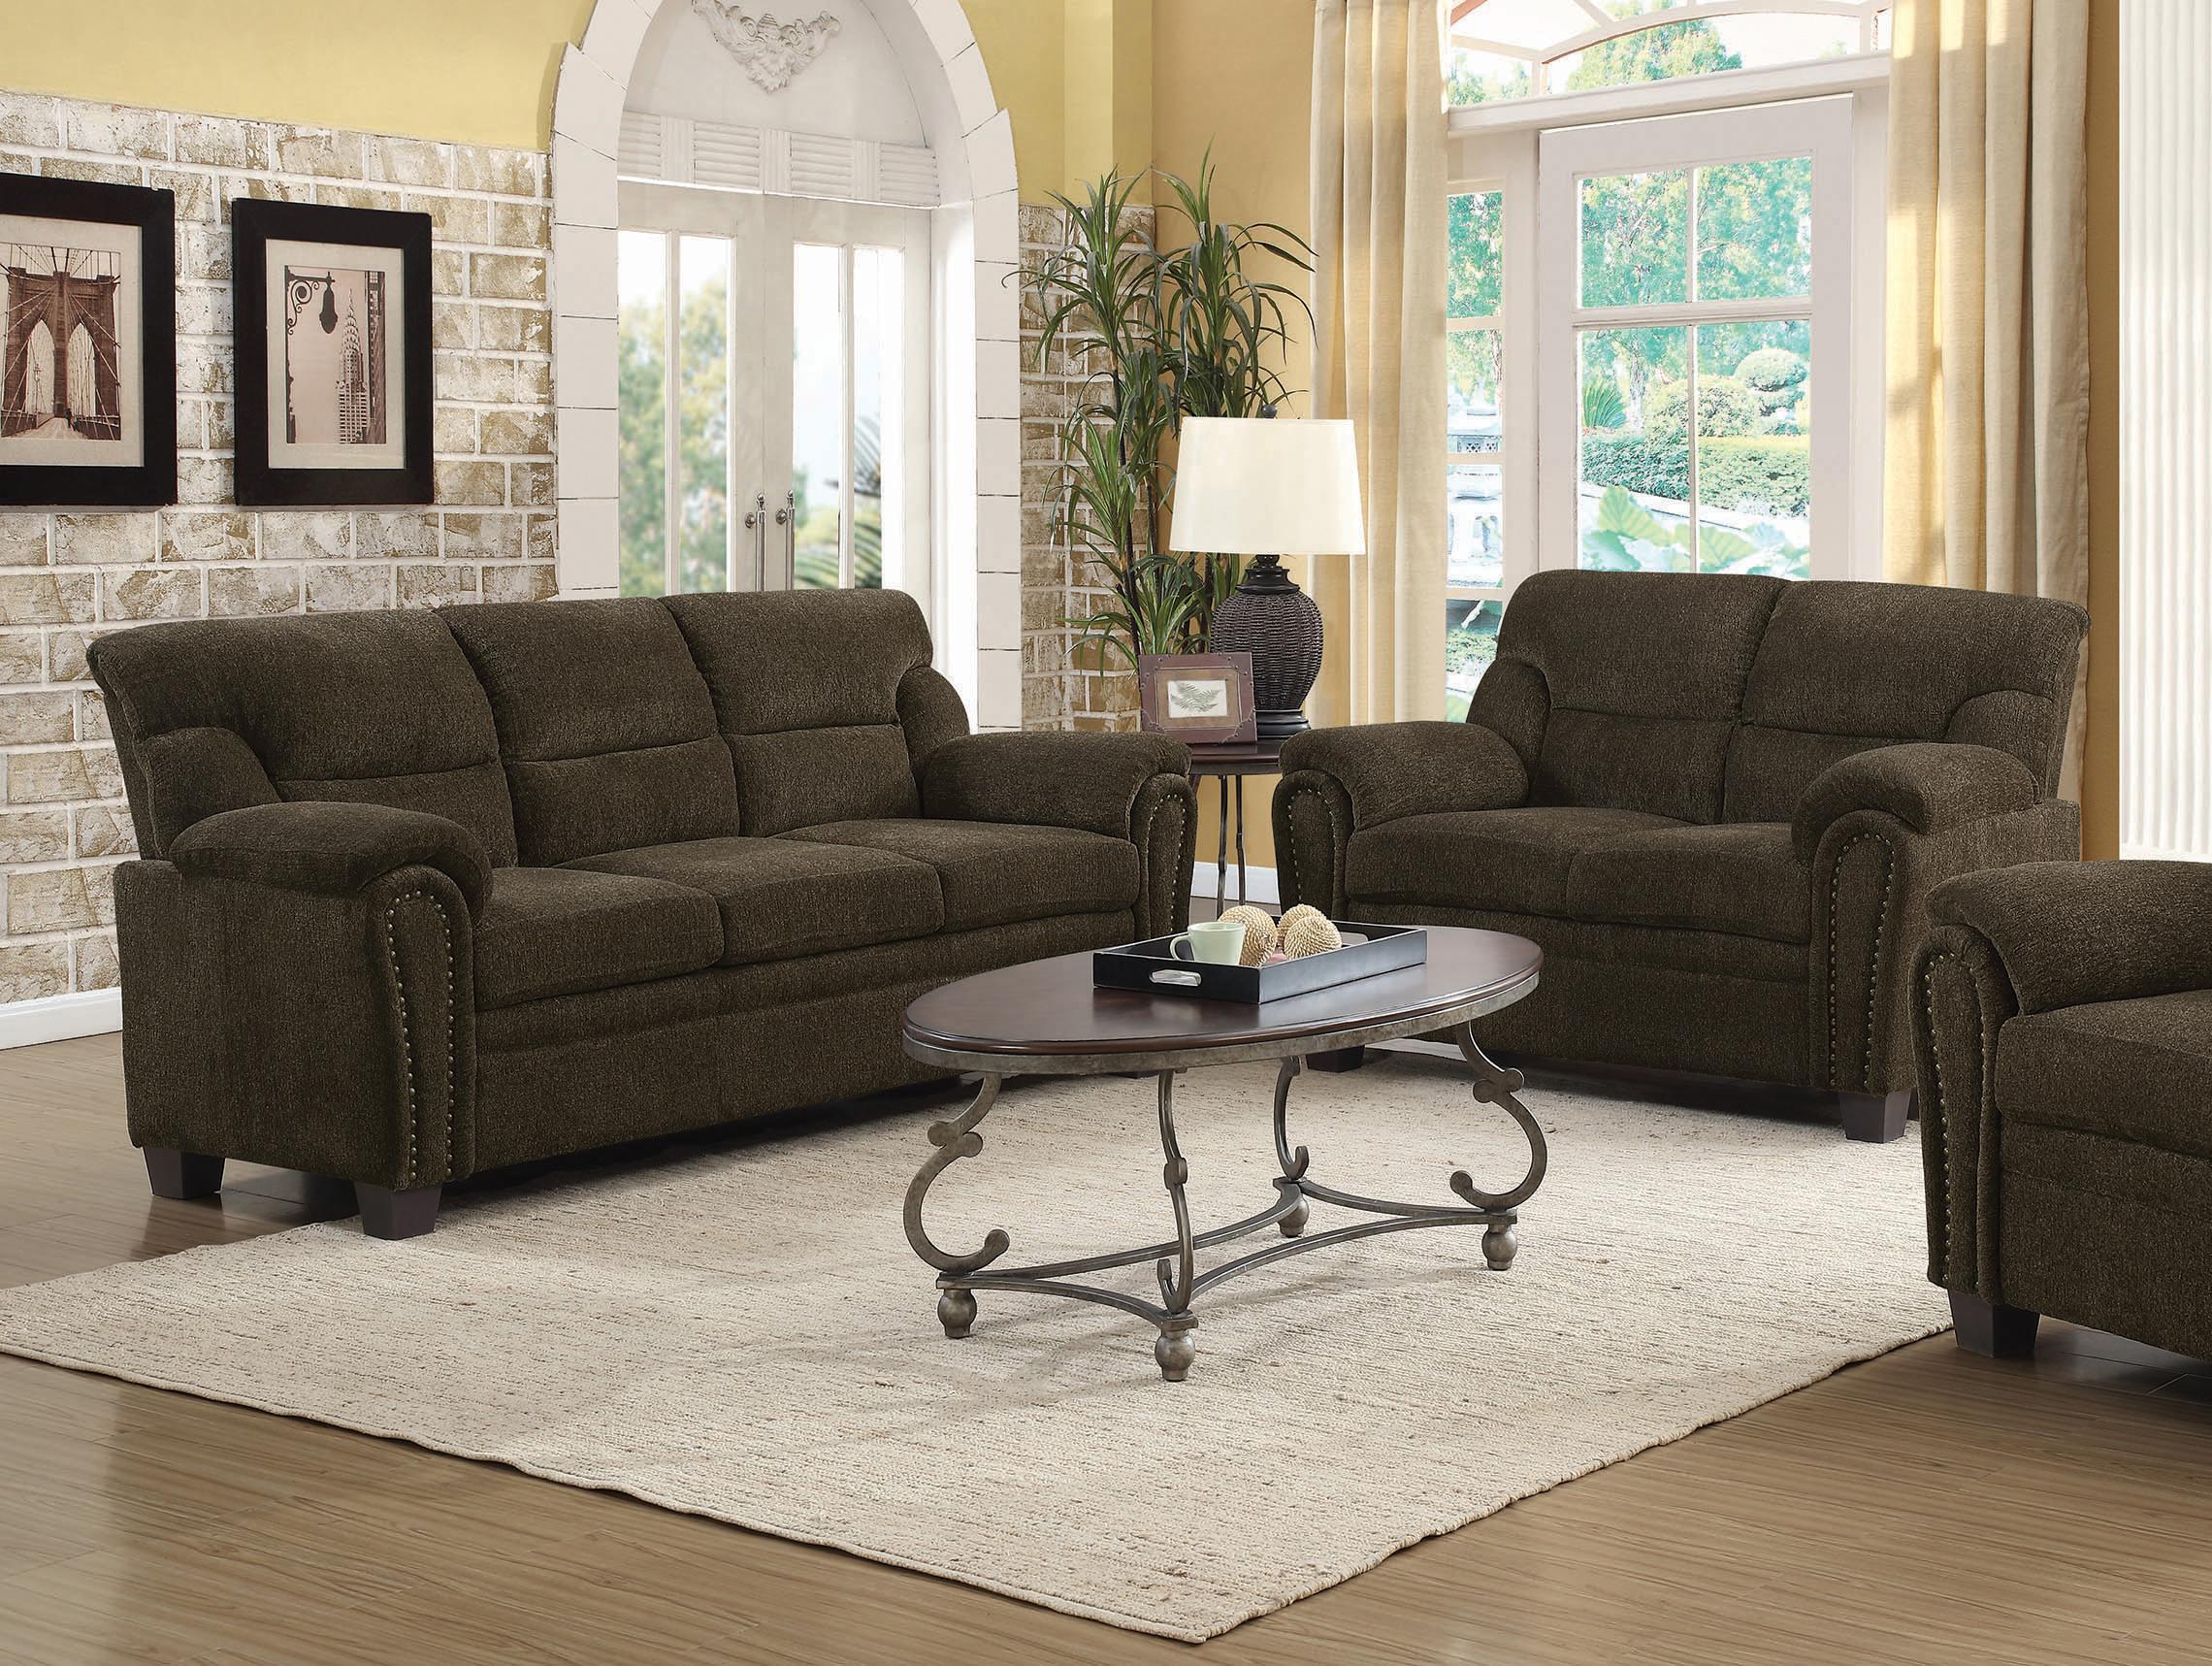 Transitional Living Room Set 506571-S2 Clemintine 506571-S2 in Brown Chenille